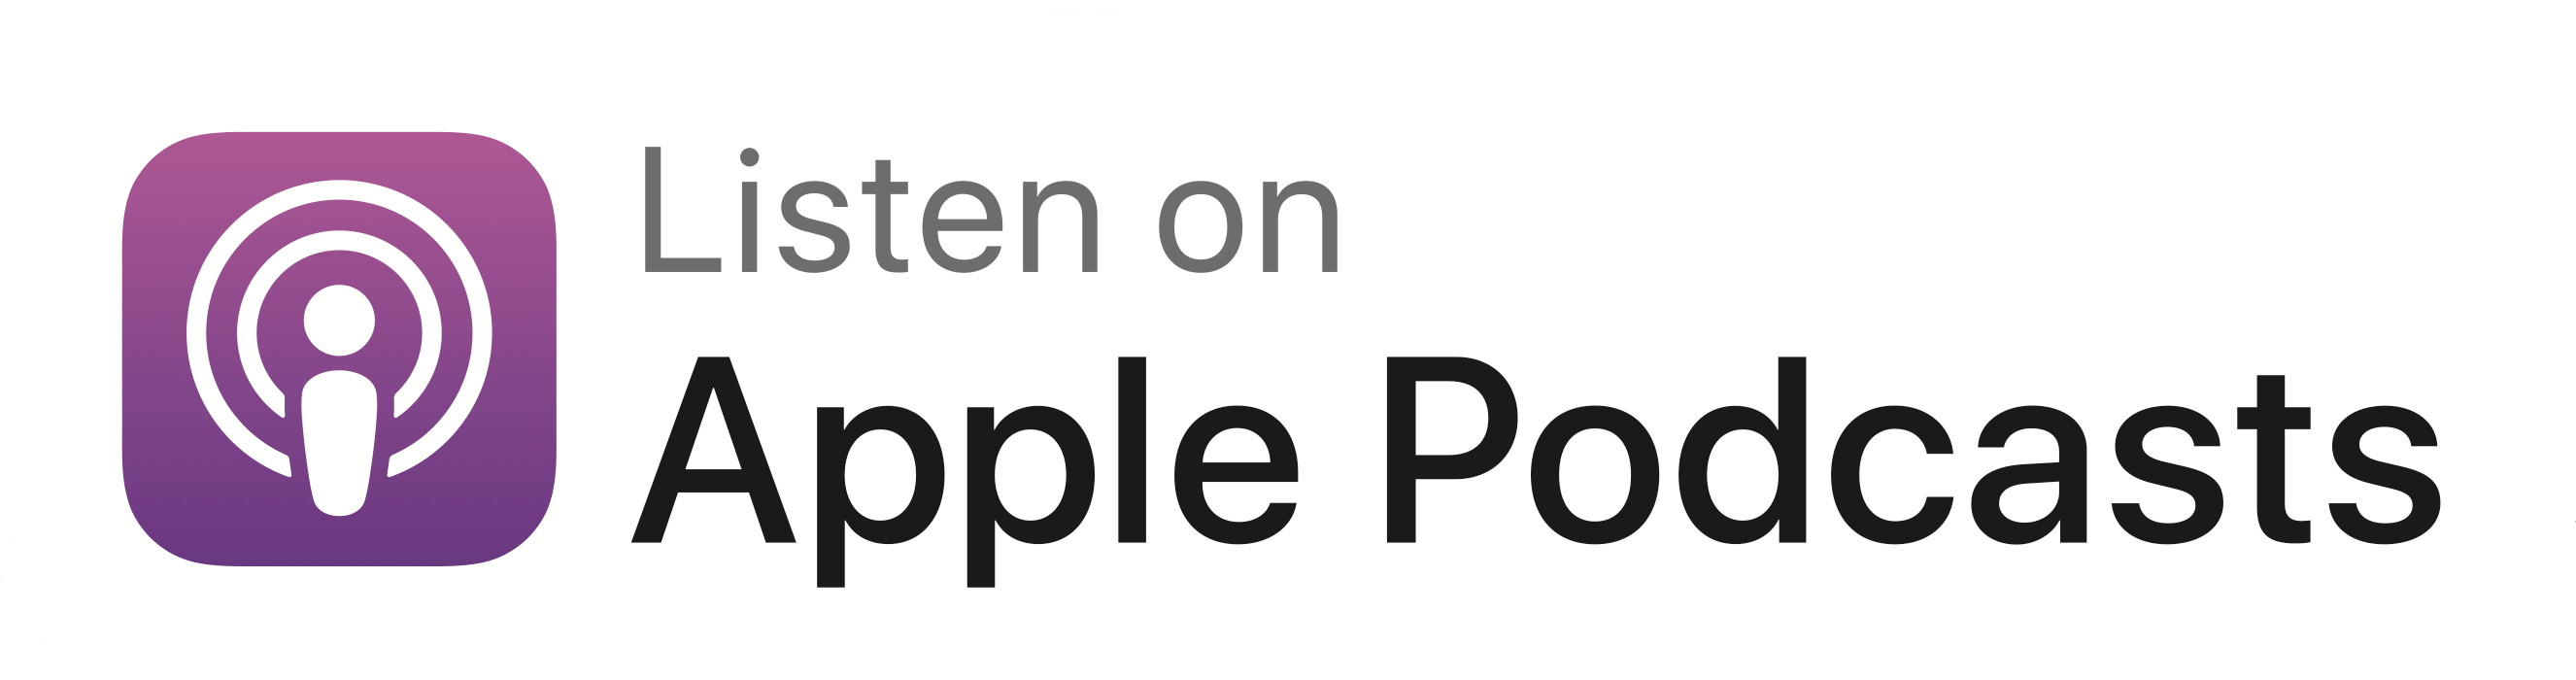 APPLE-LOGO-Best-Quality-Full-Size.png